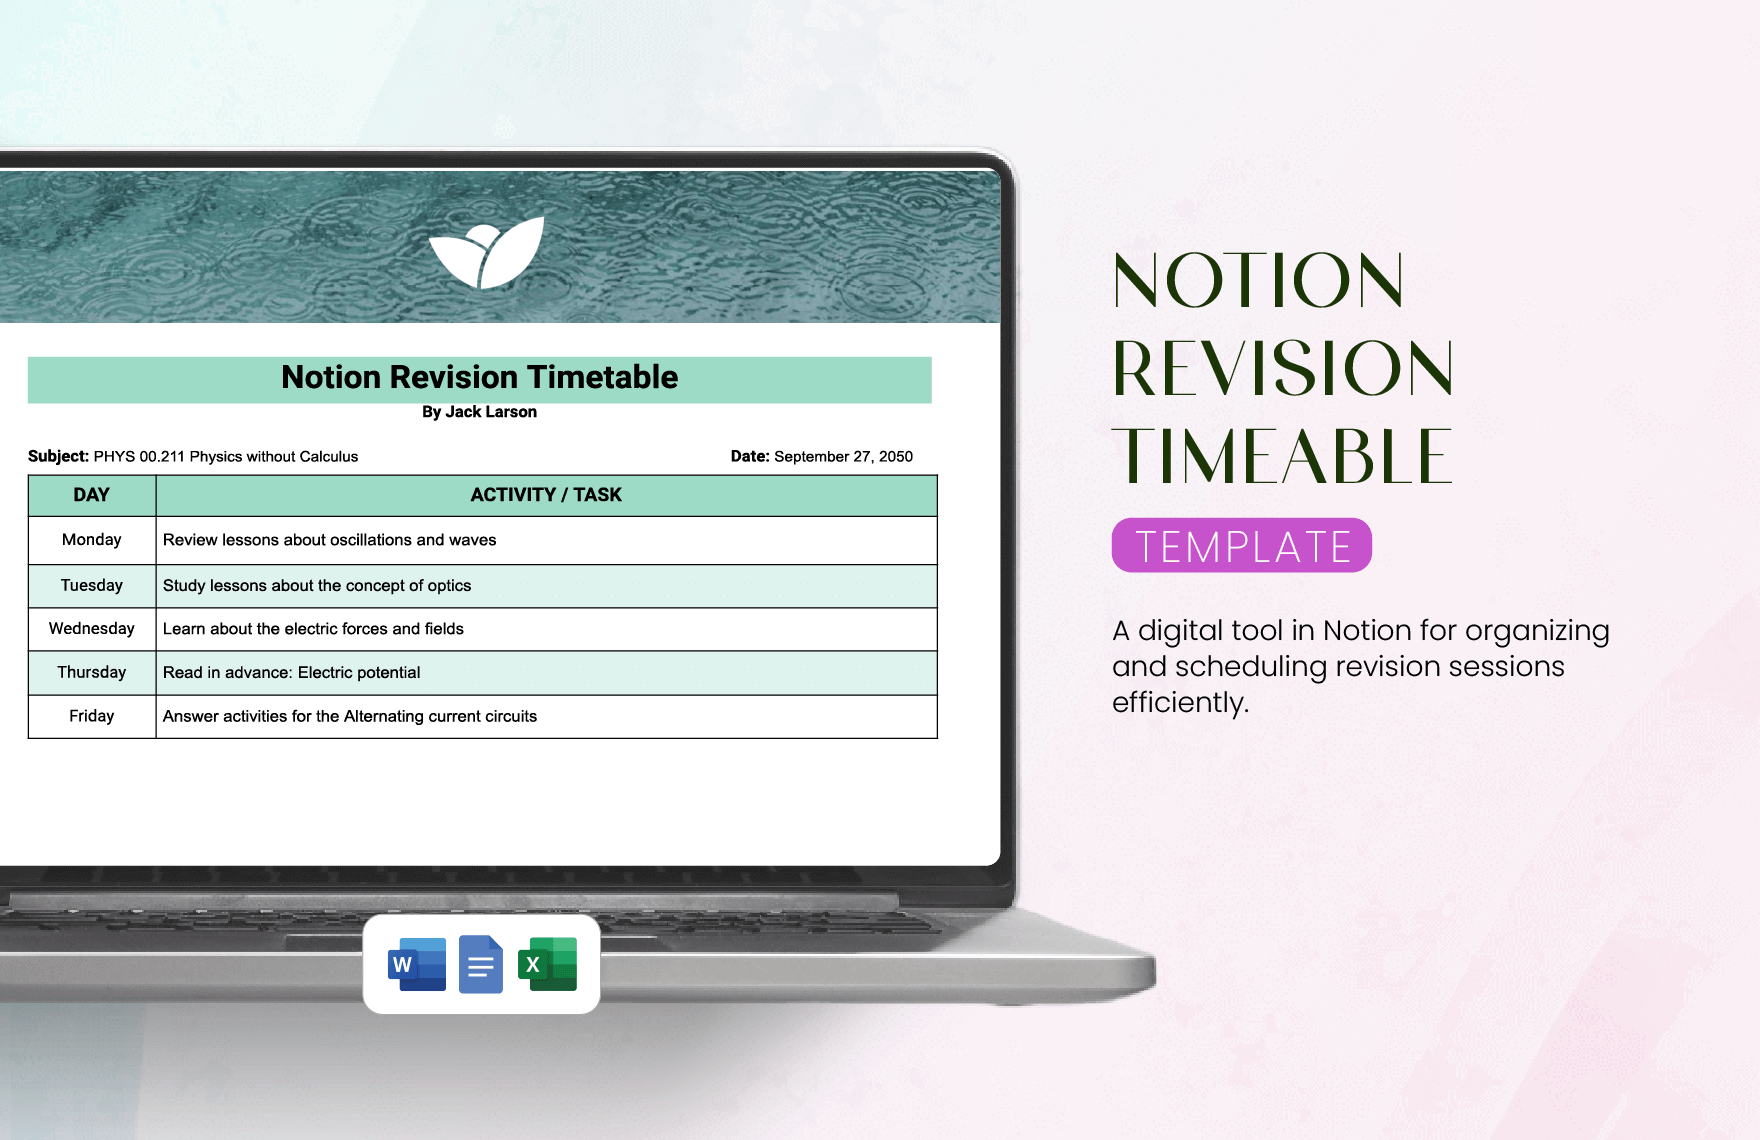 Notion Revision Timetable Template in Word, Google Docs, Excel